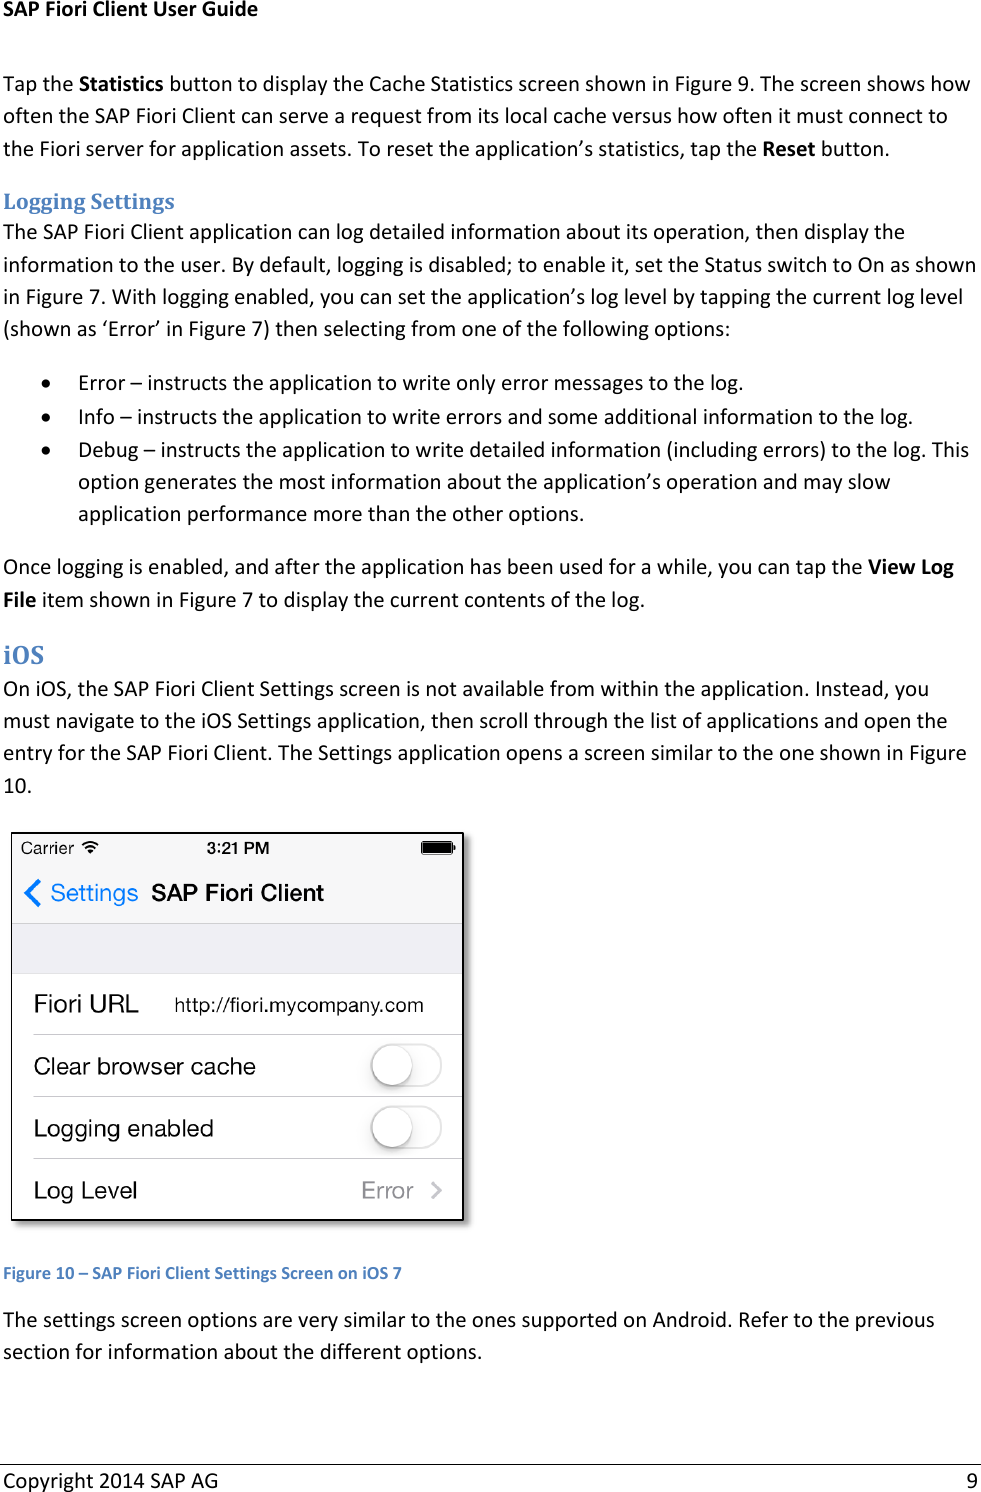 Page 10 of 12 - SAP Fiori Client User Guide